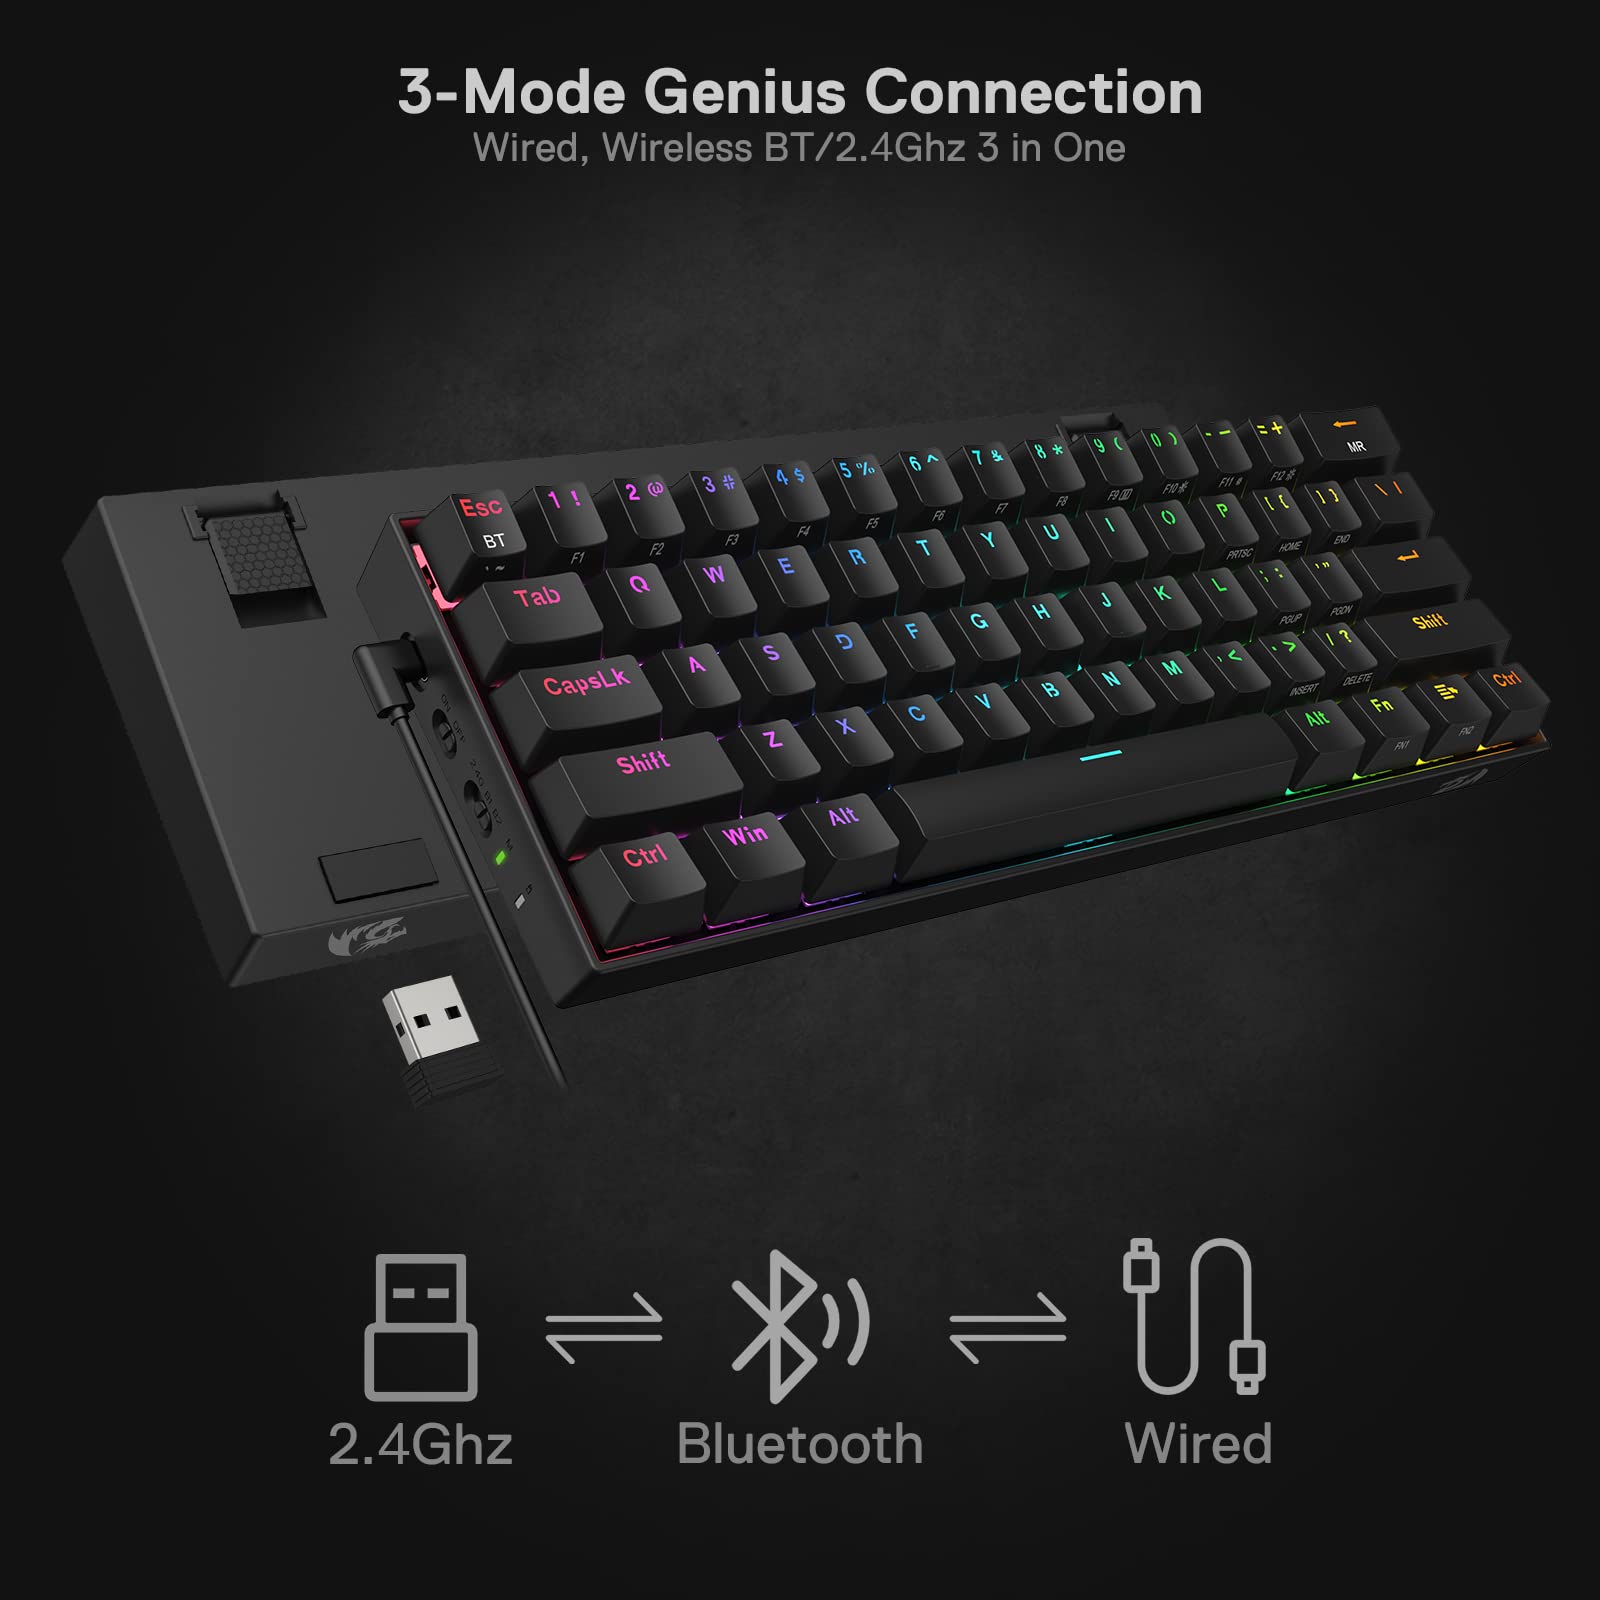 Redragon K530 Pro Draconic 60% Wireless RGB Mechanical Keyboard, Bluetooth/2.4Ghz/Wired 3-Mode 61 Keys Compact Gaming Keyboard w/Hot-Swap Socket, Free-Mod Plate Mounted PCB & Linear Red Switch